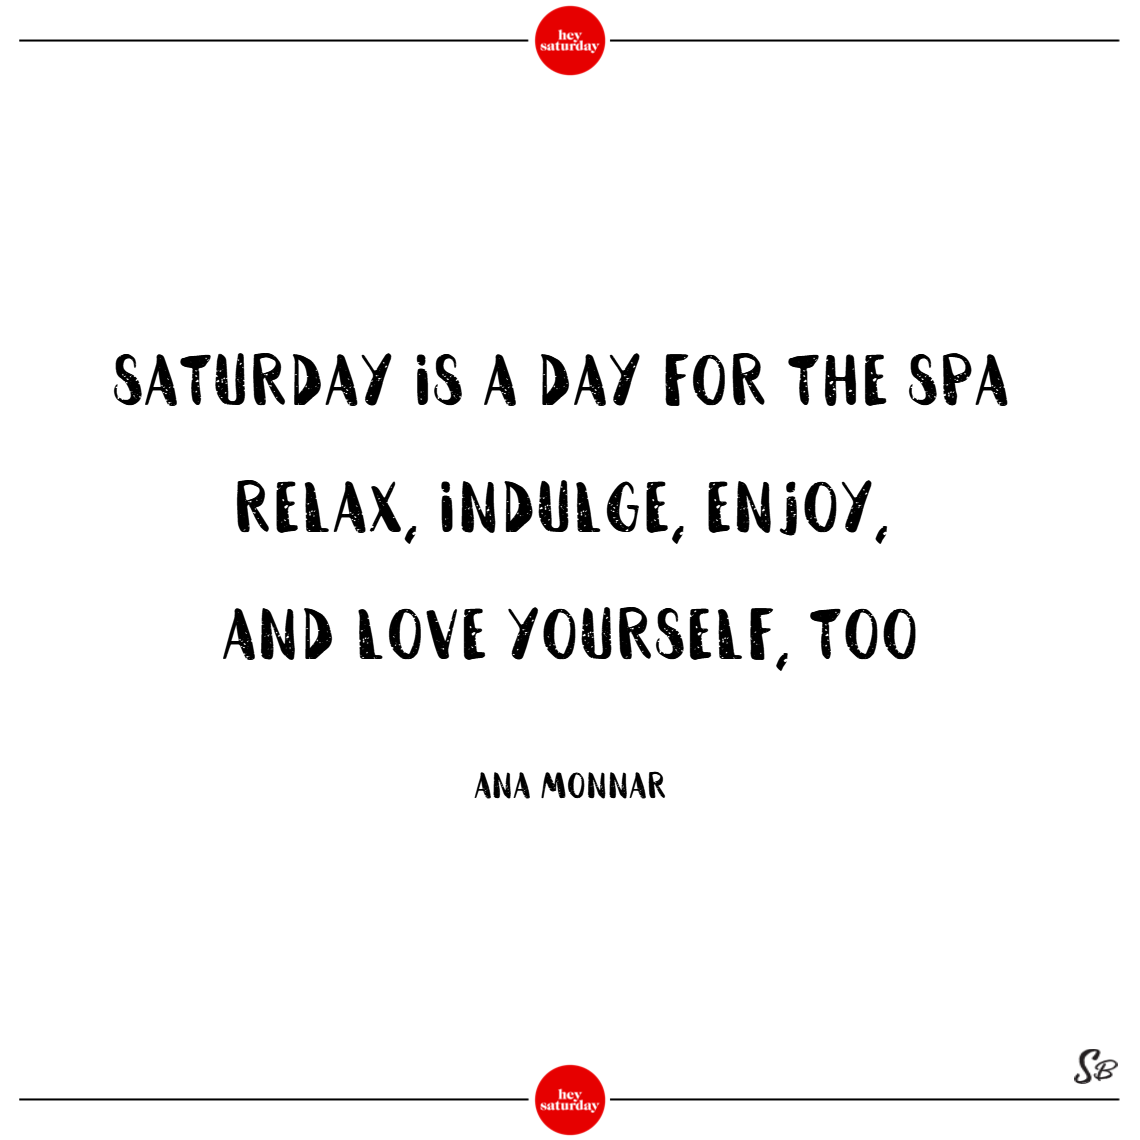 Saturday is a day for the spa. relax, indulge, enjoy, and love yourself, too. - ana monnar